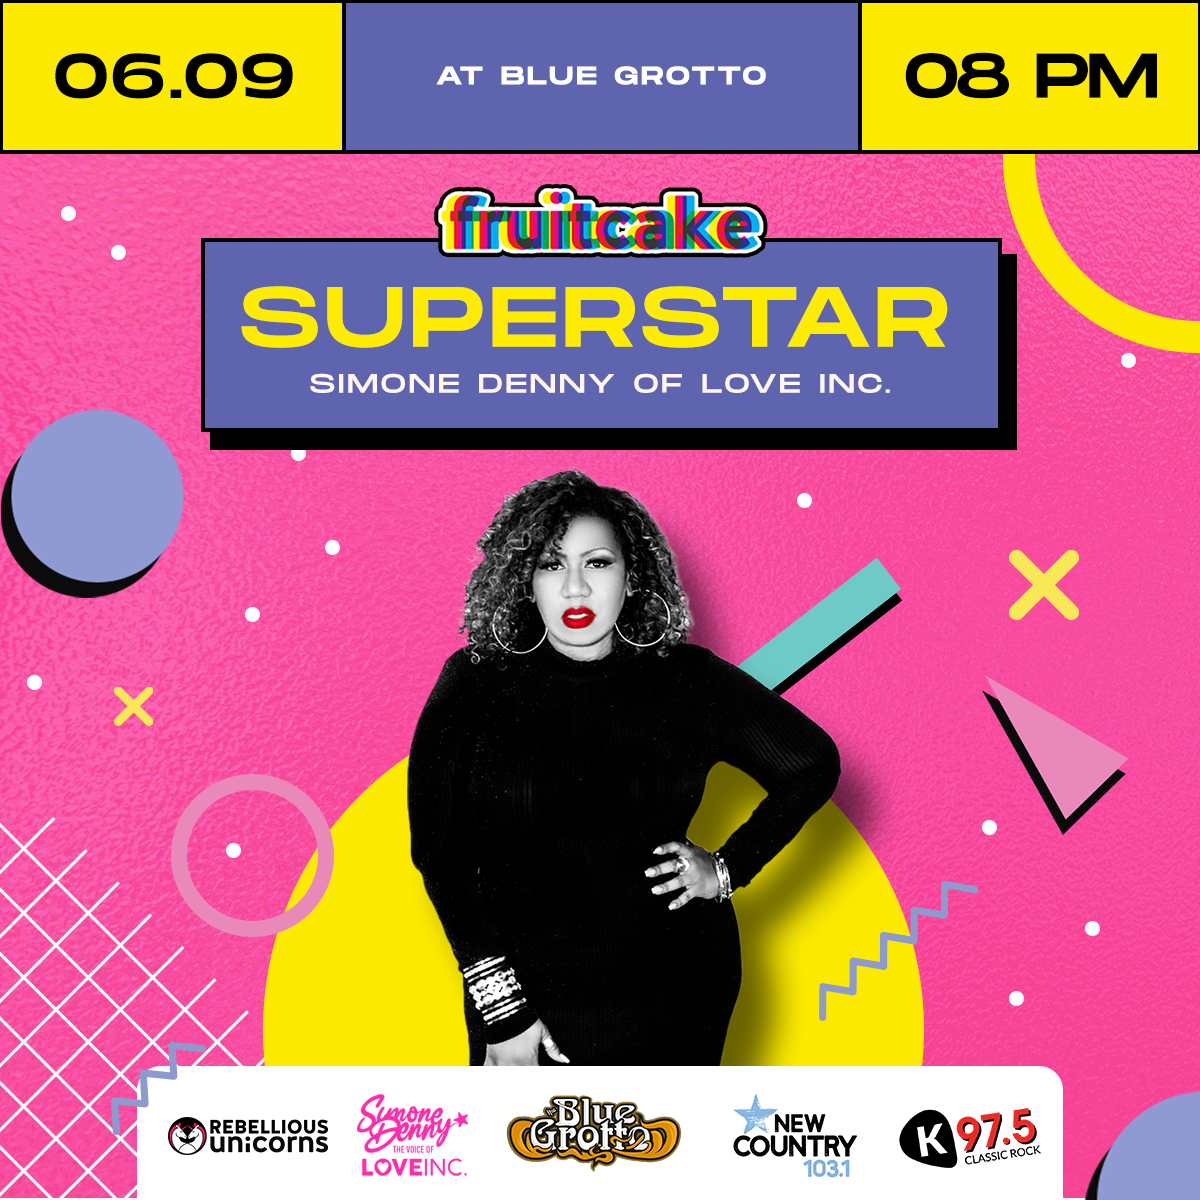 FruitCake: Superstar with Simone Denny of Love Inc. (Kamloops) June 9th